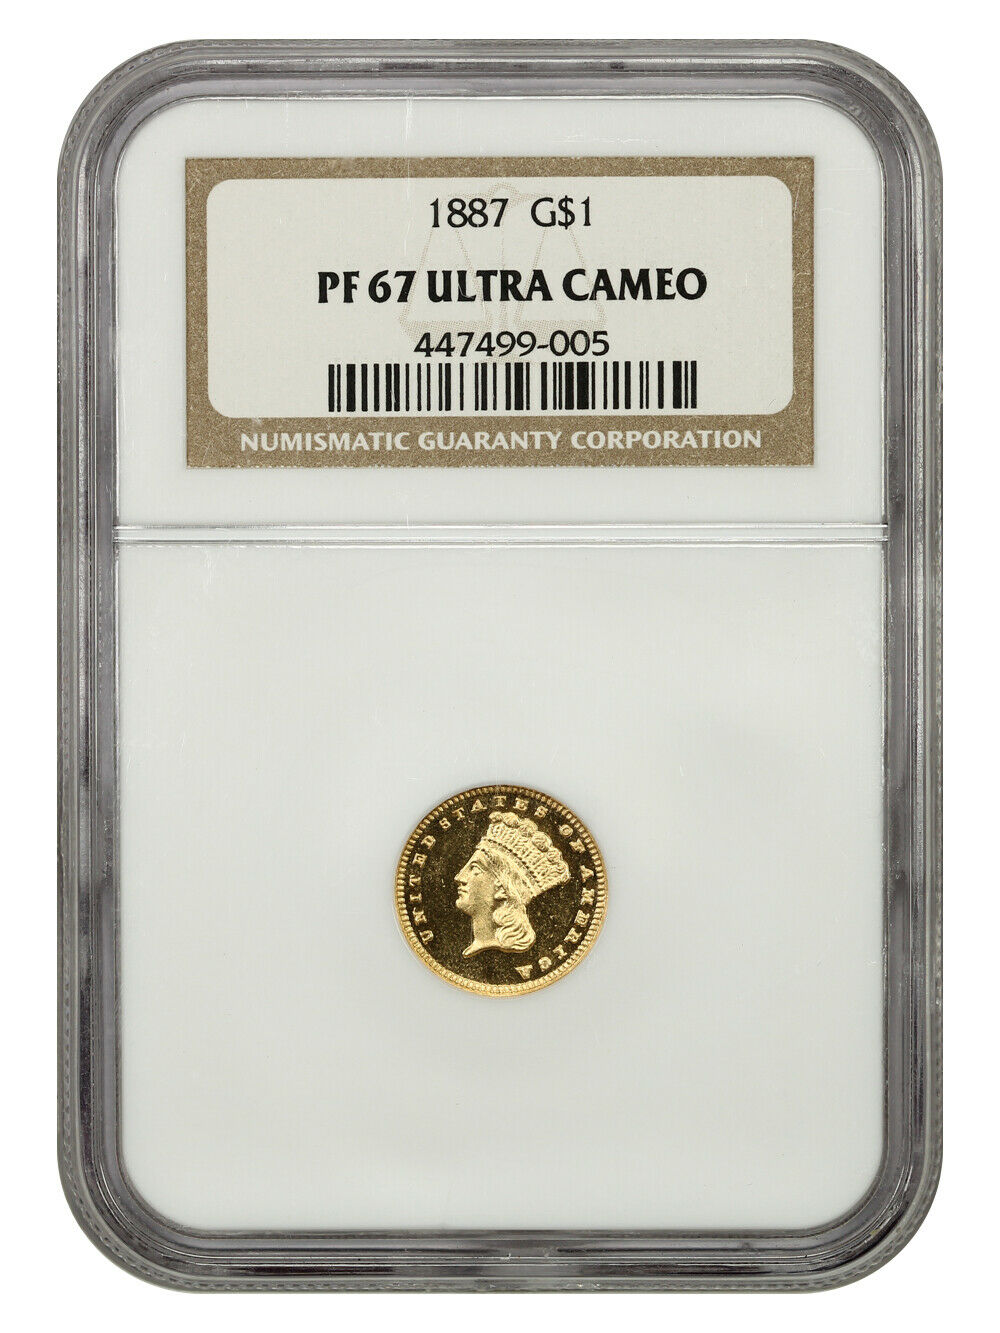 1887 G$1 Ngc Pr 67 Dcam - Tied For Finest Known - 1 Gold Coin